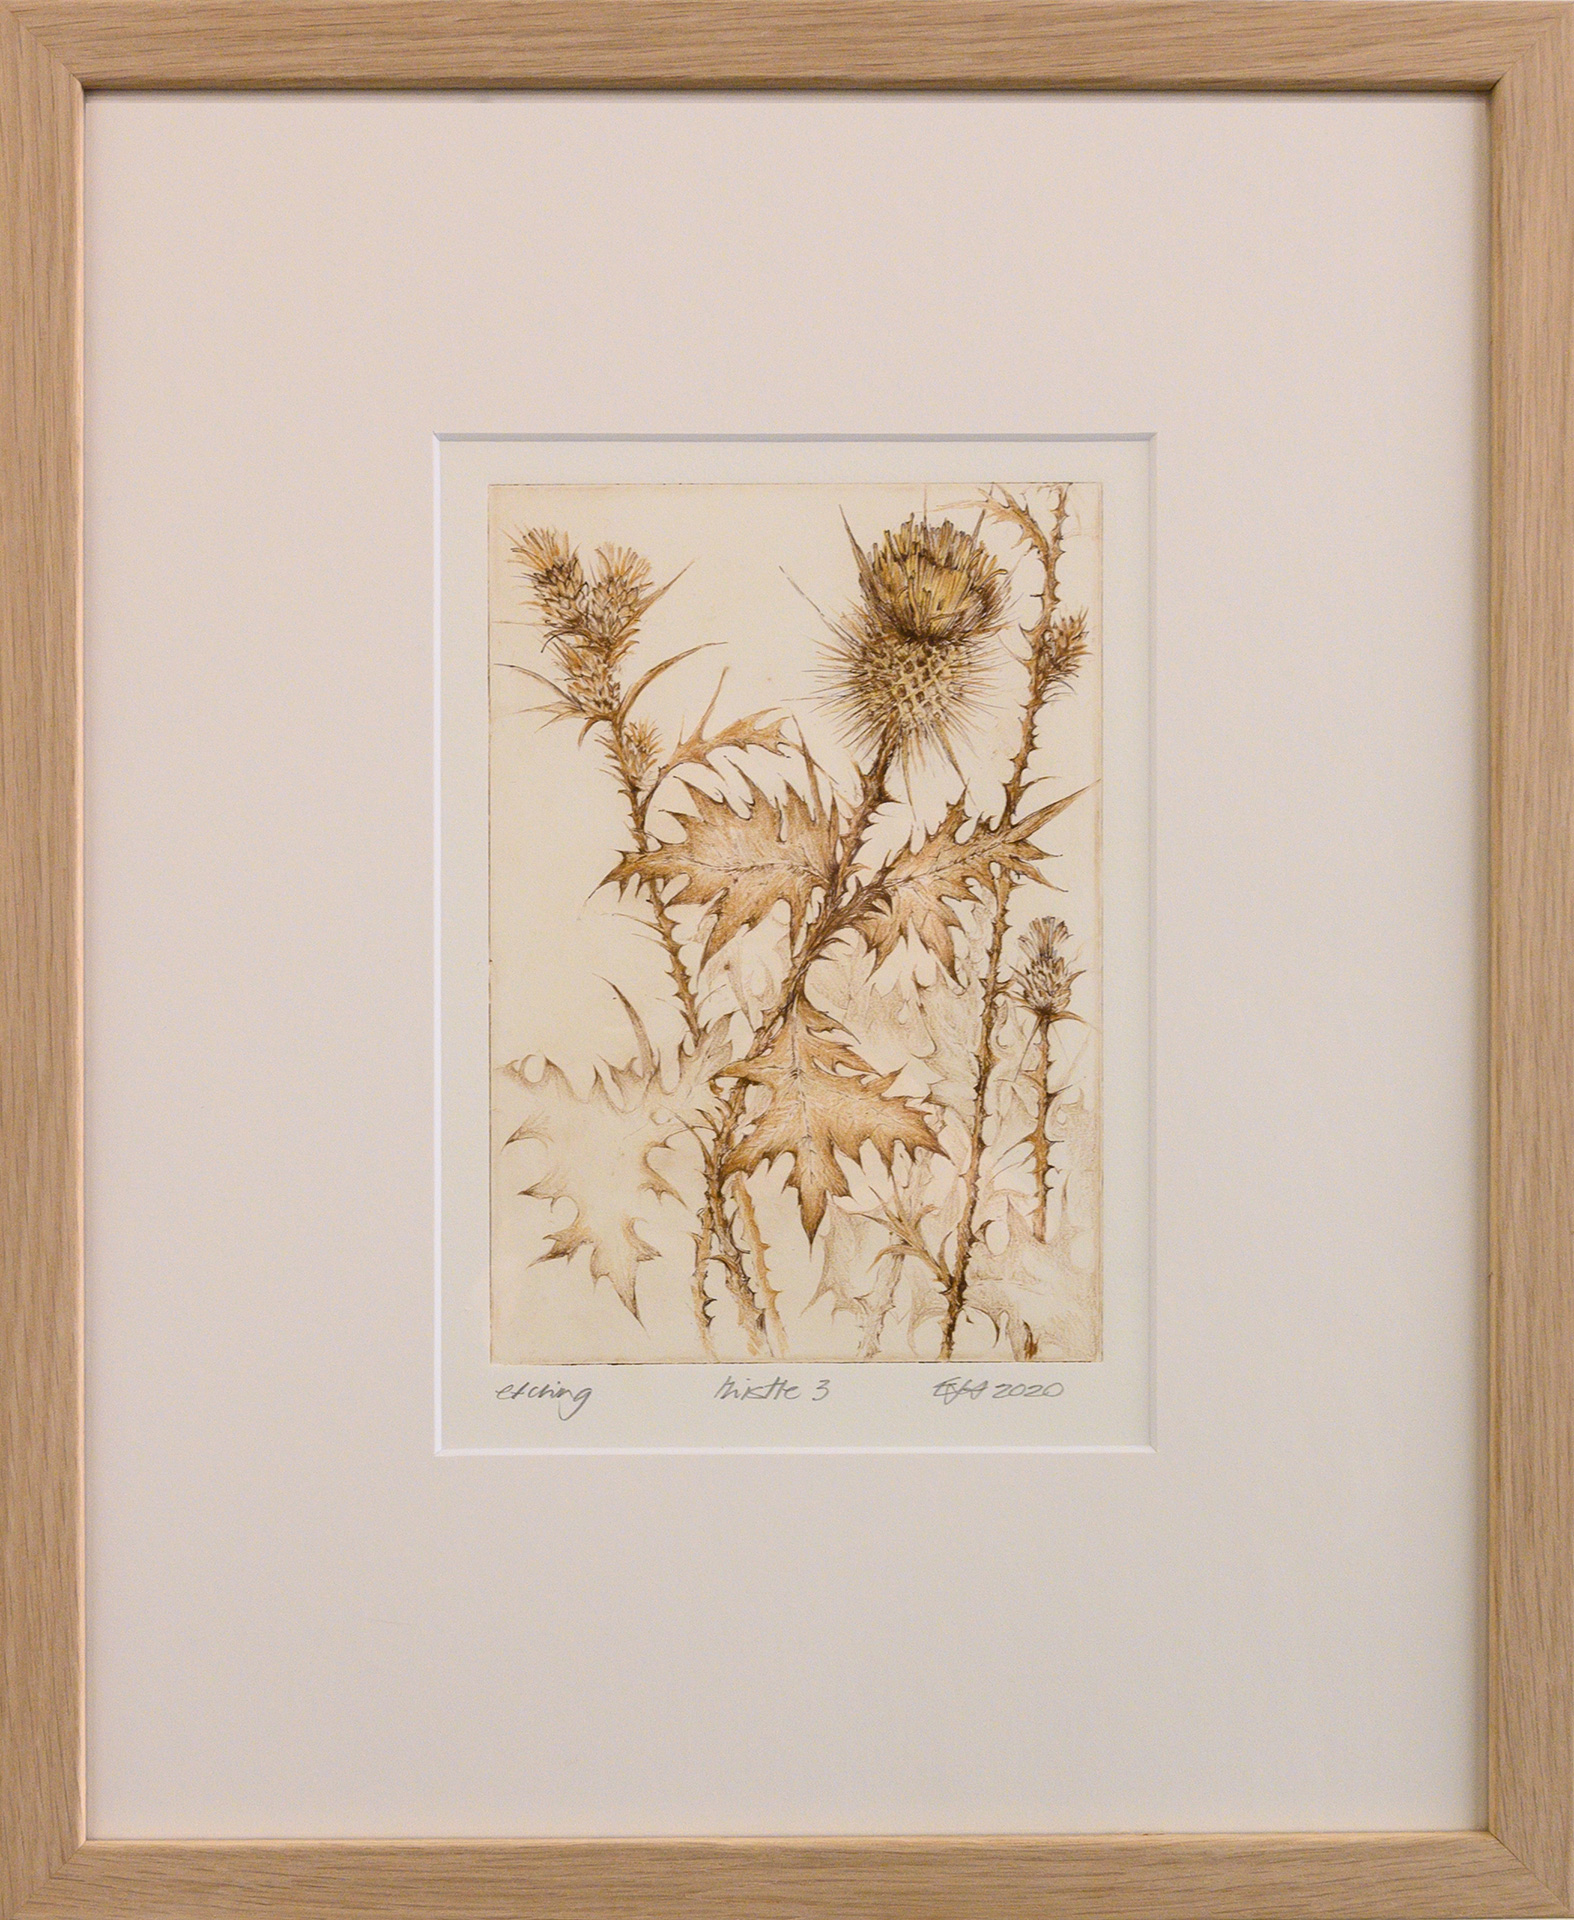 Framed artwork by Libby Altschwager of a brown image of a Scotch Thistle